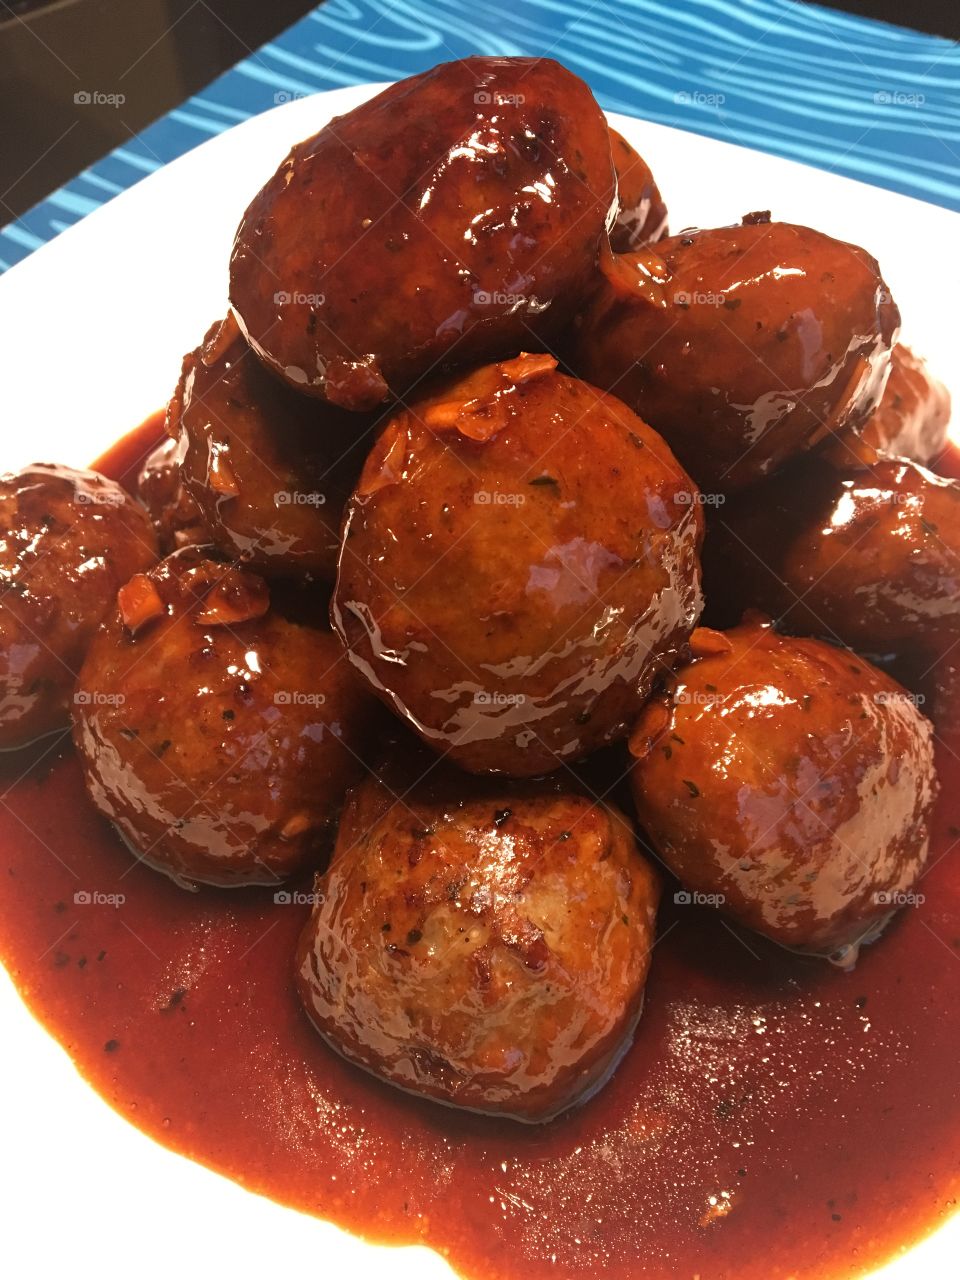 Filling up my tummy with these awesome meatballs with sweet and spicy sauce